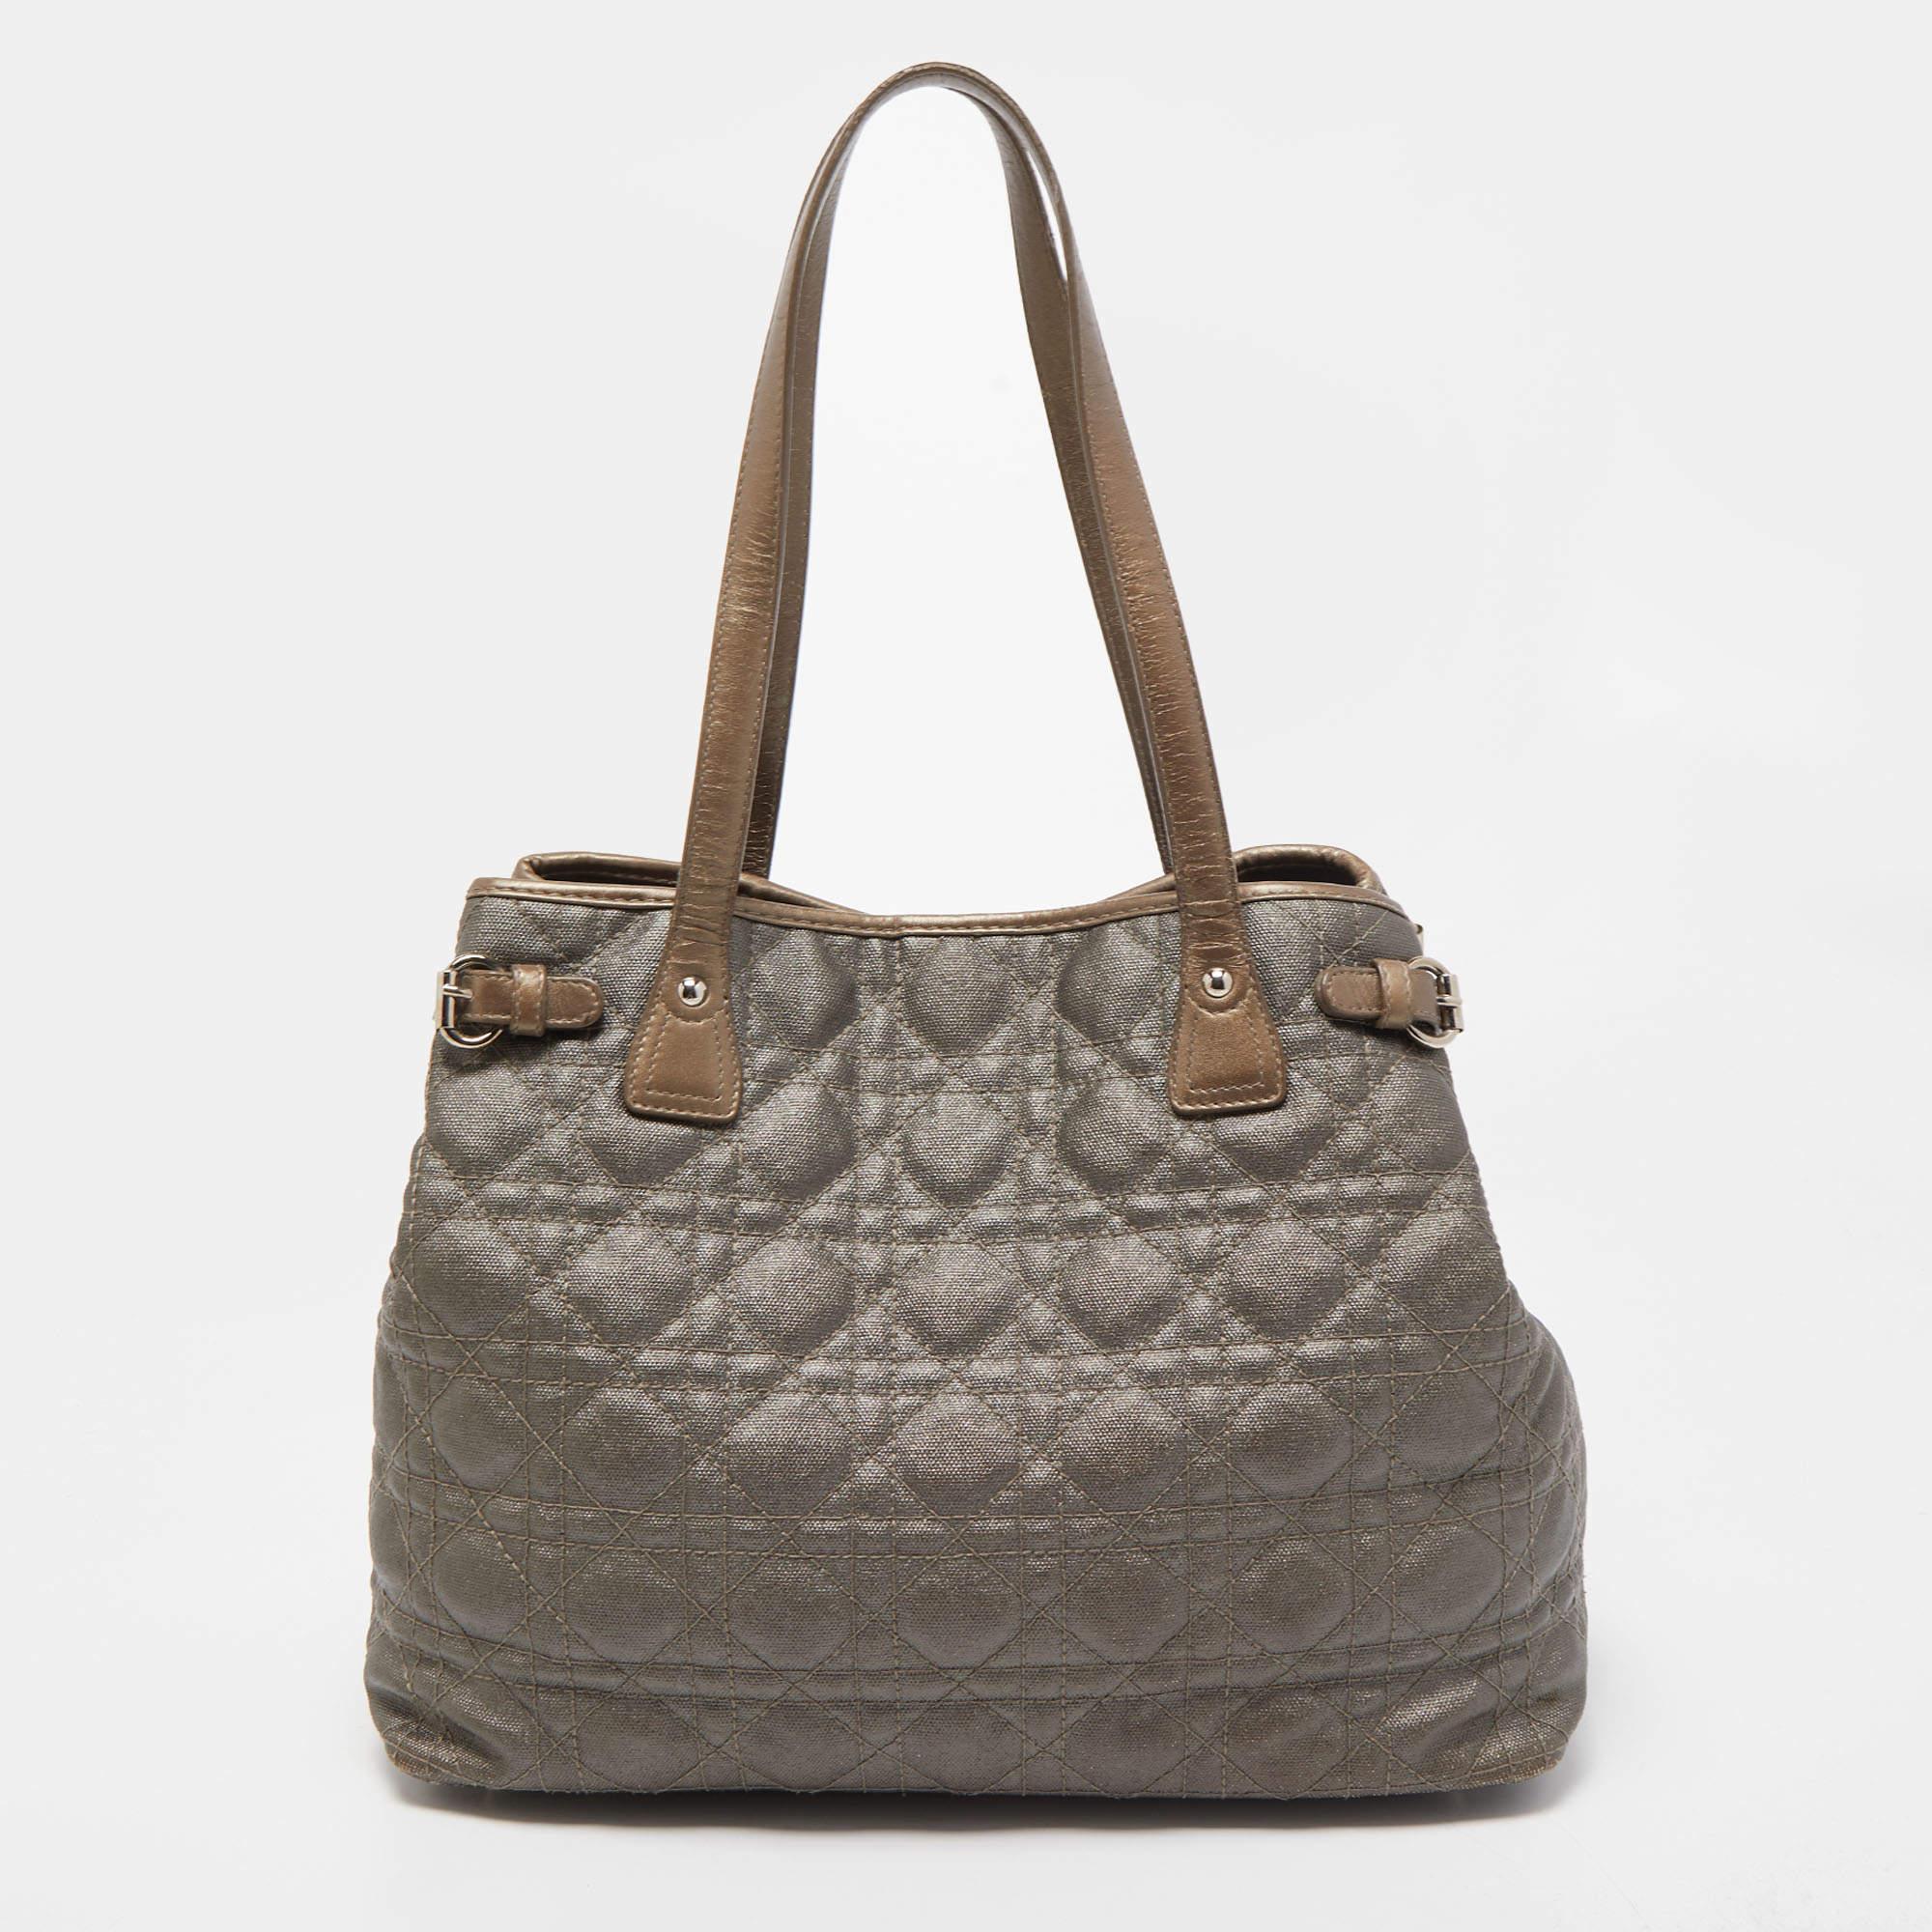 This tote from the Panarea collection by Dior is both urban and practical with its classic lines. Made from coated canvas in their signature Cannage quilt, this tote is accented with silver-tone hardware and DIOR charms. It also features dual